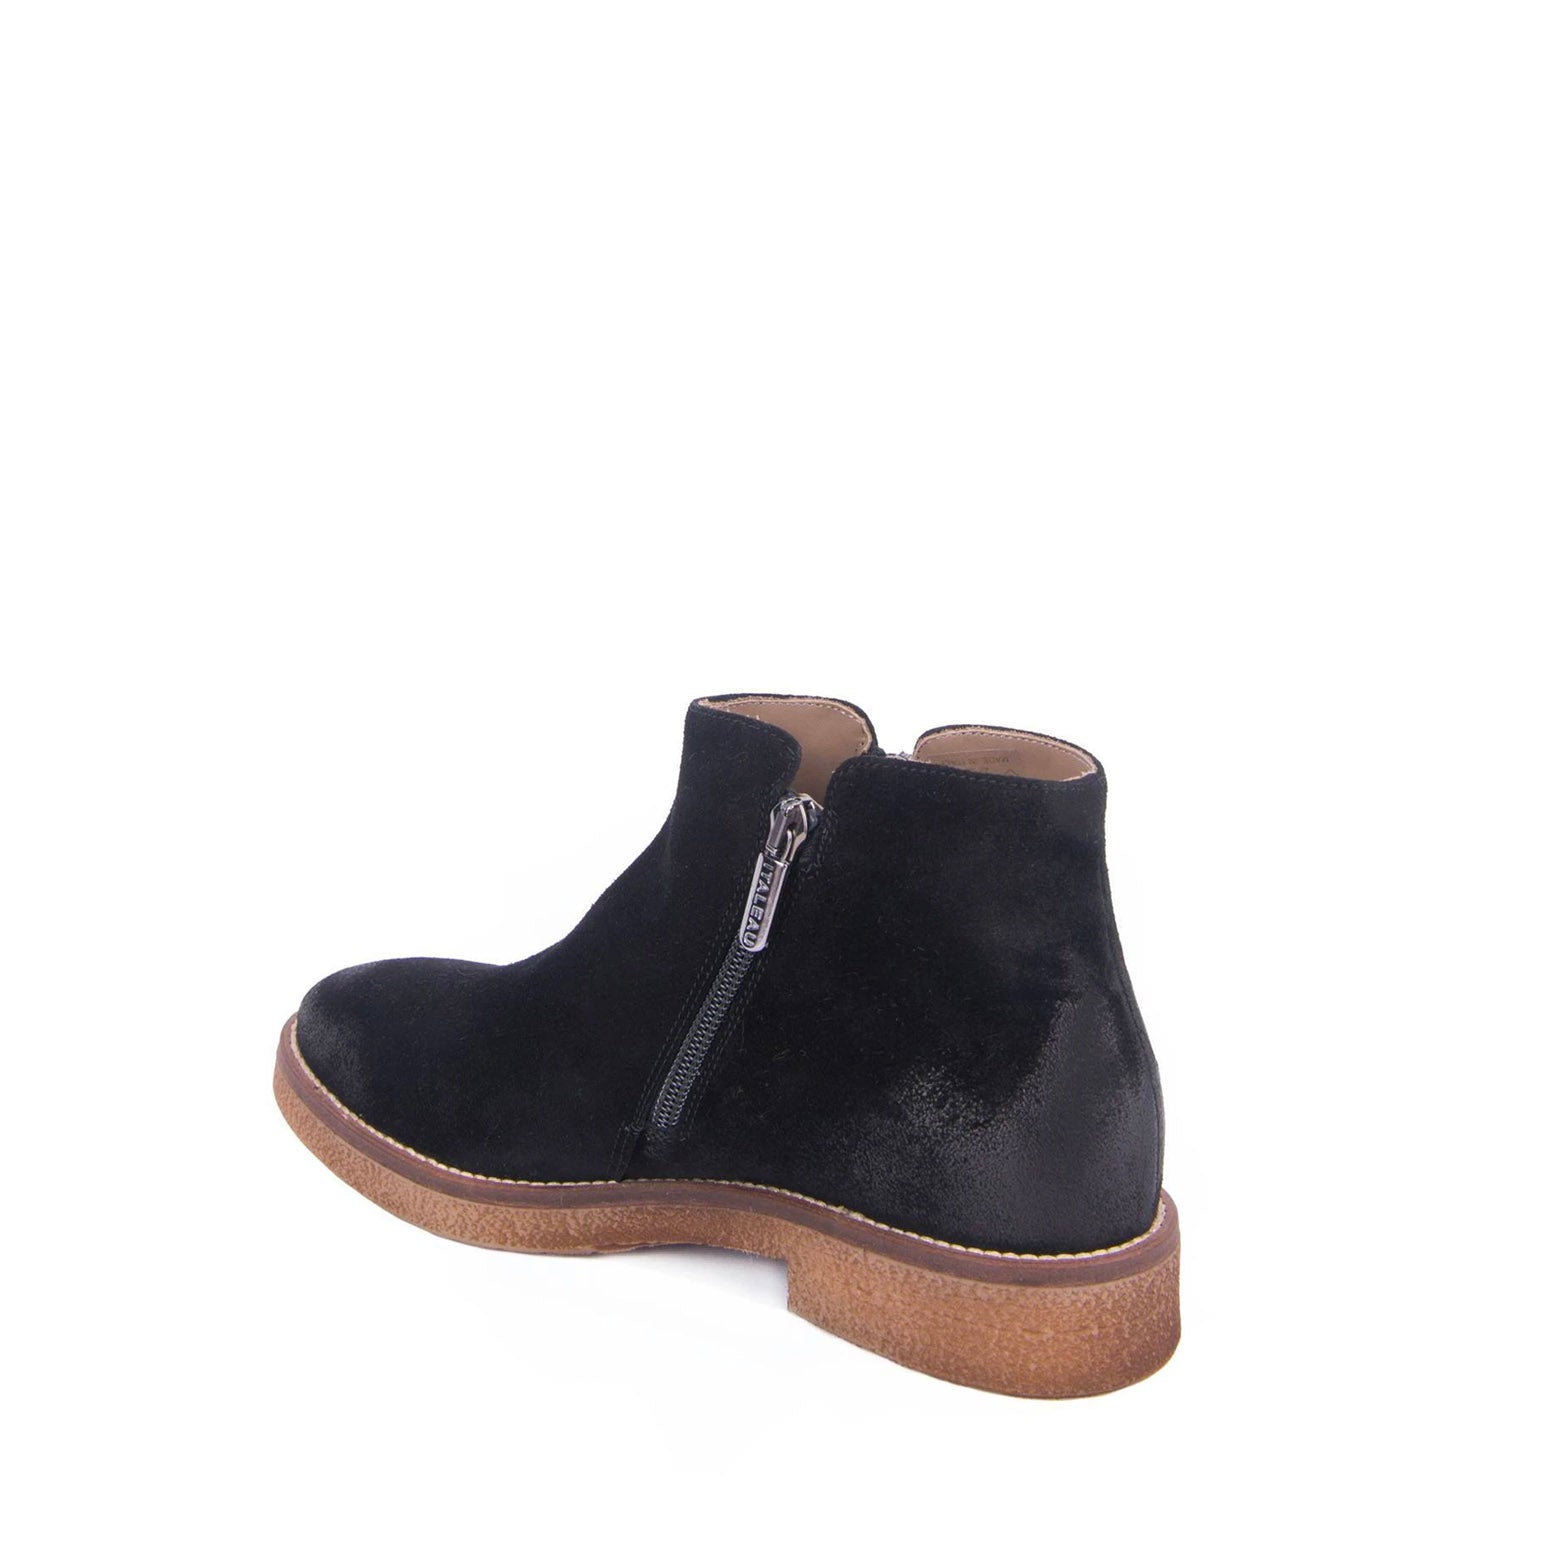 suede boots women's ankle